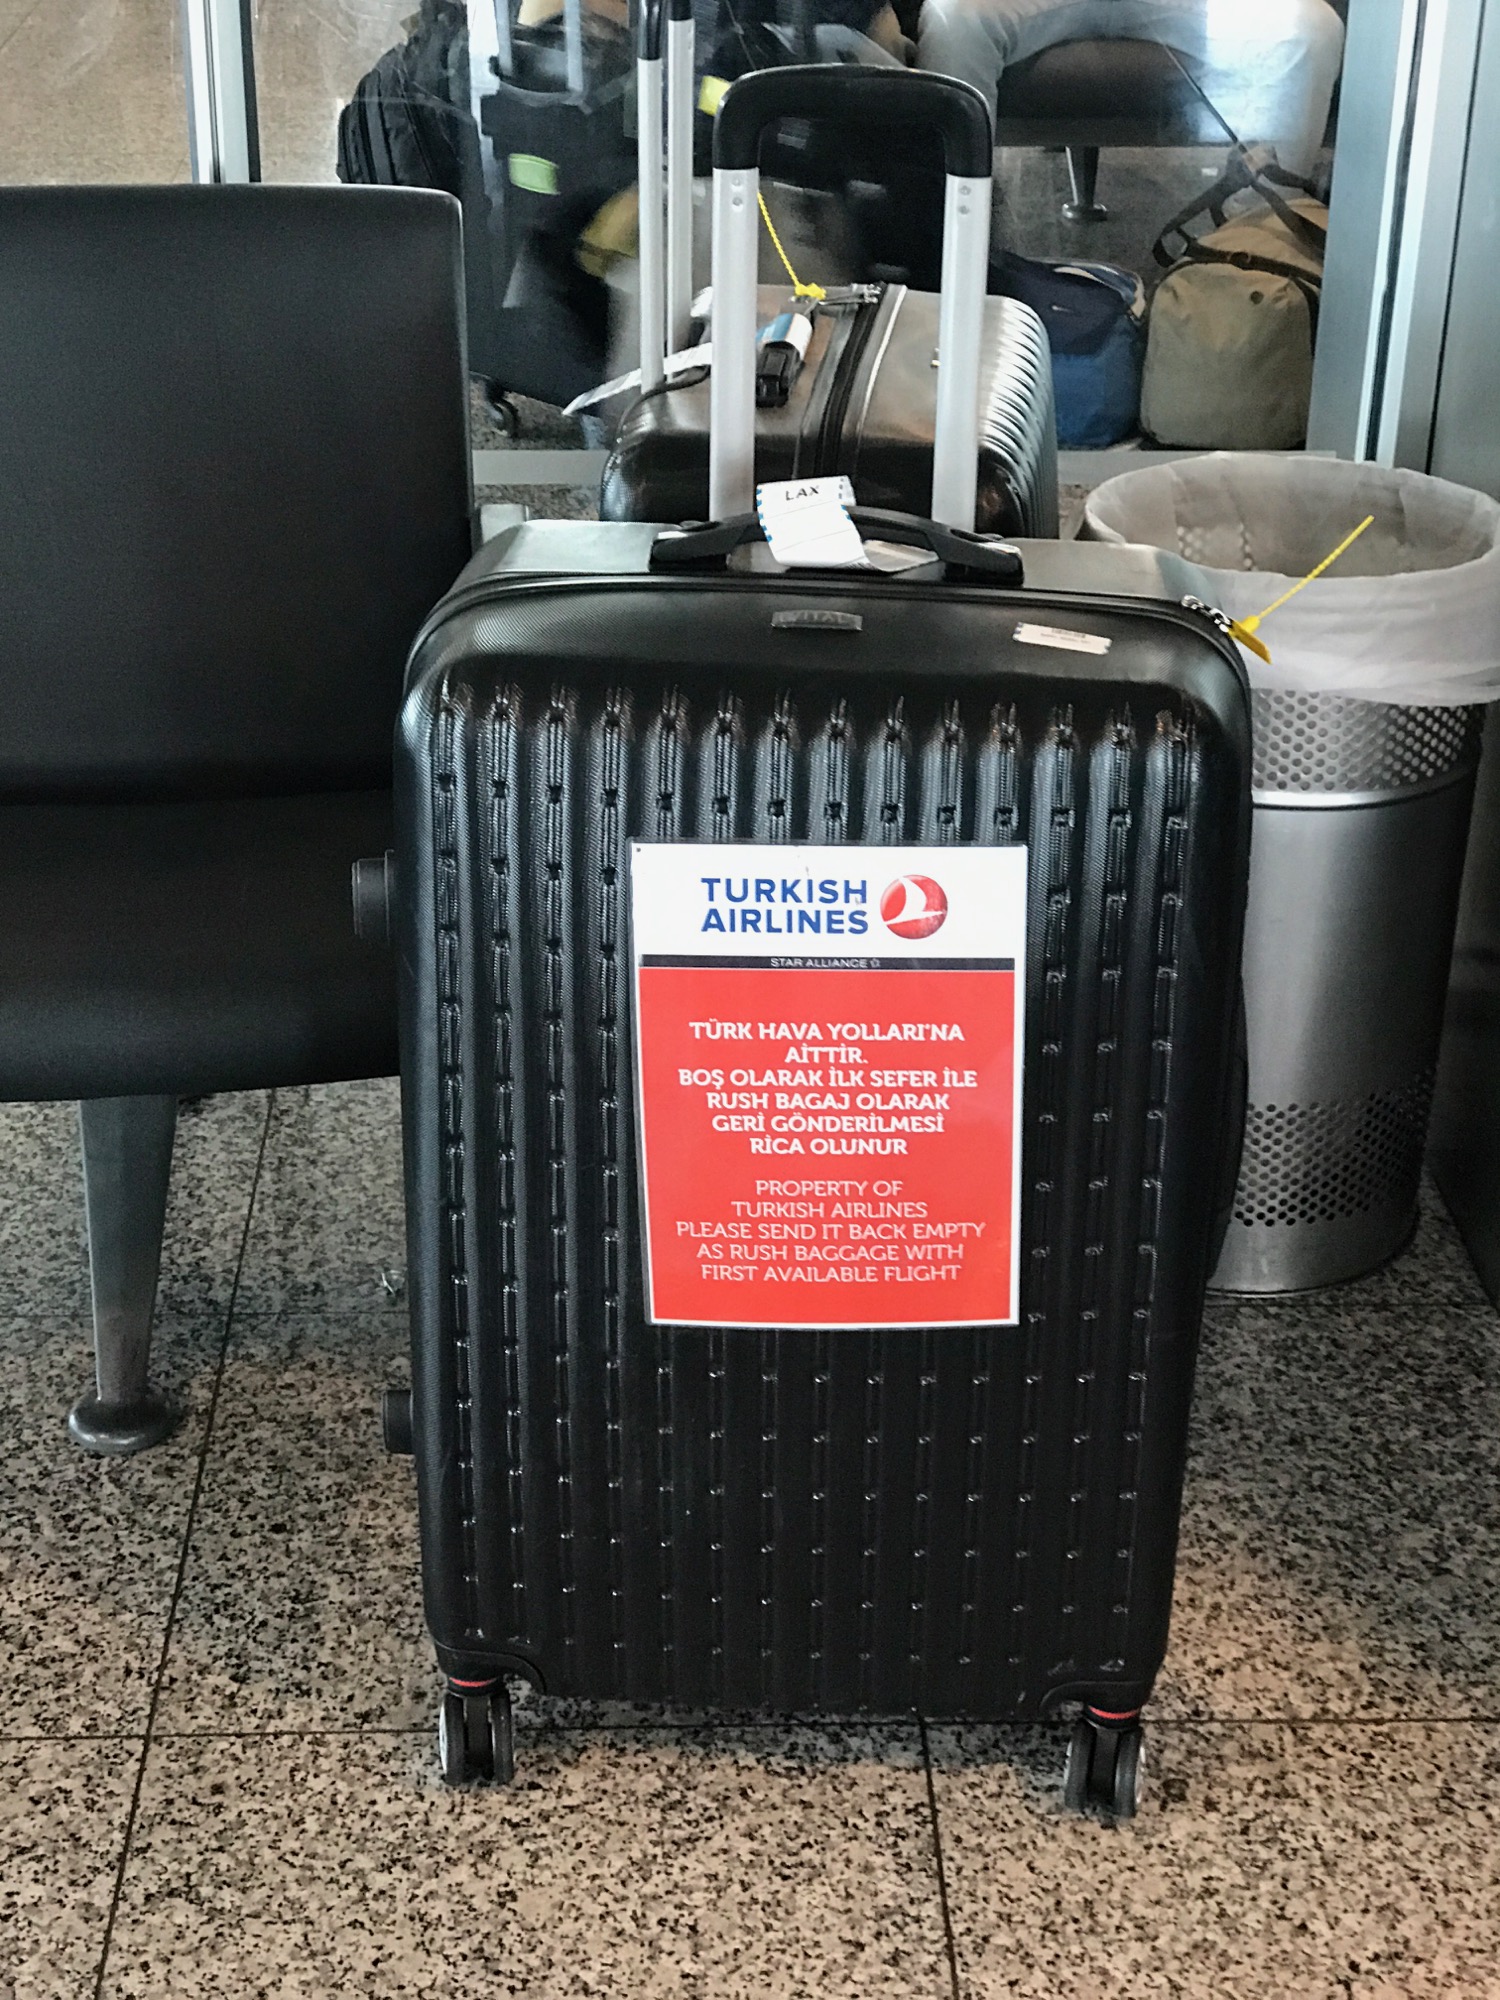 Turkish Airlines Electronics Ban Guide - 19